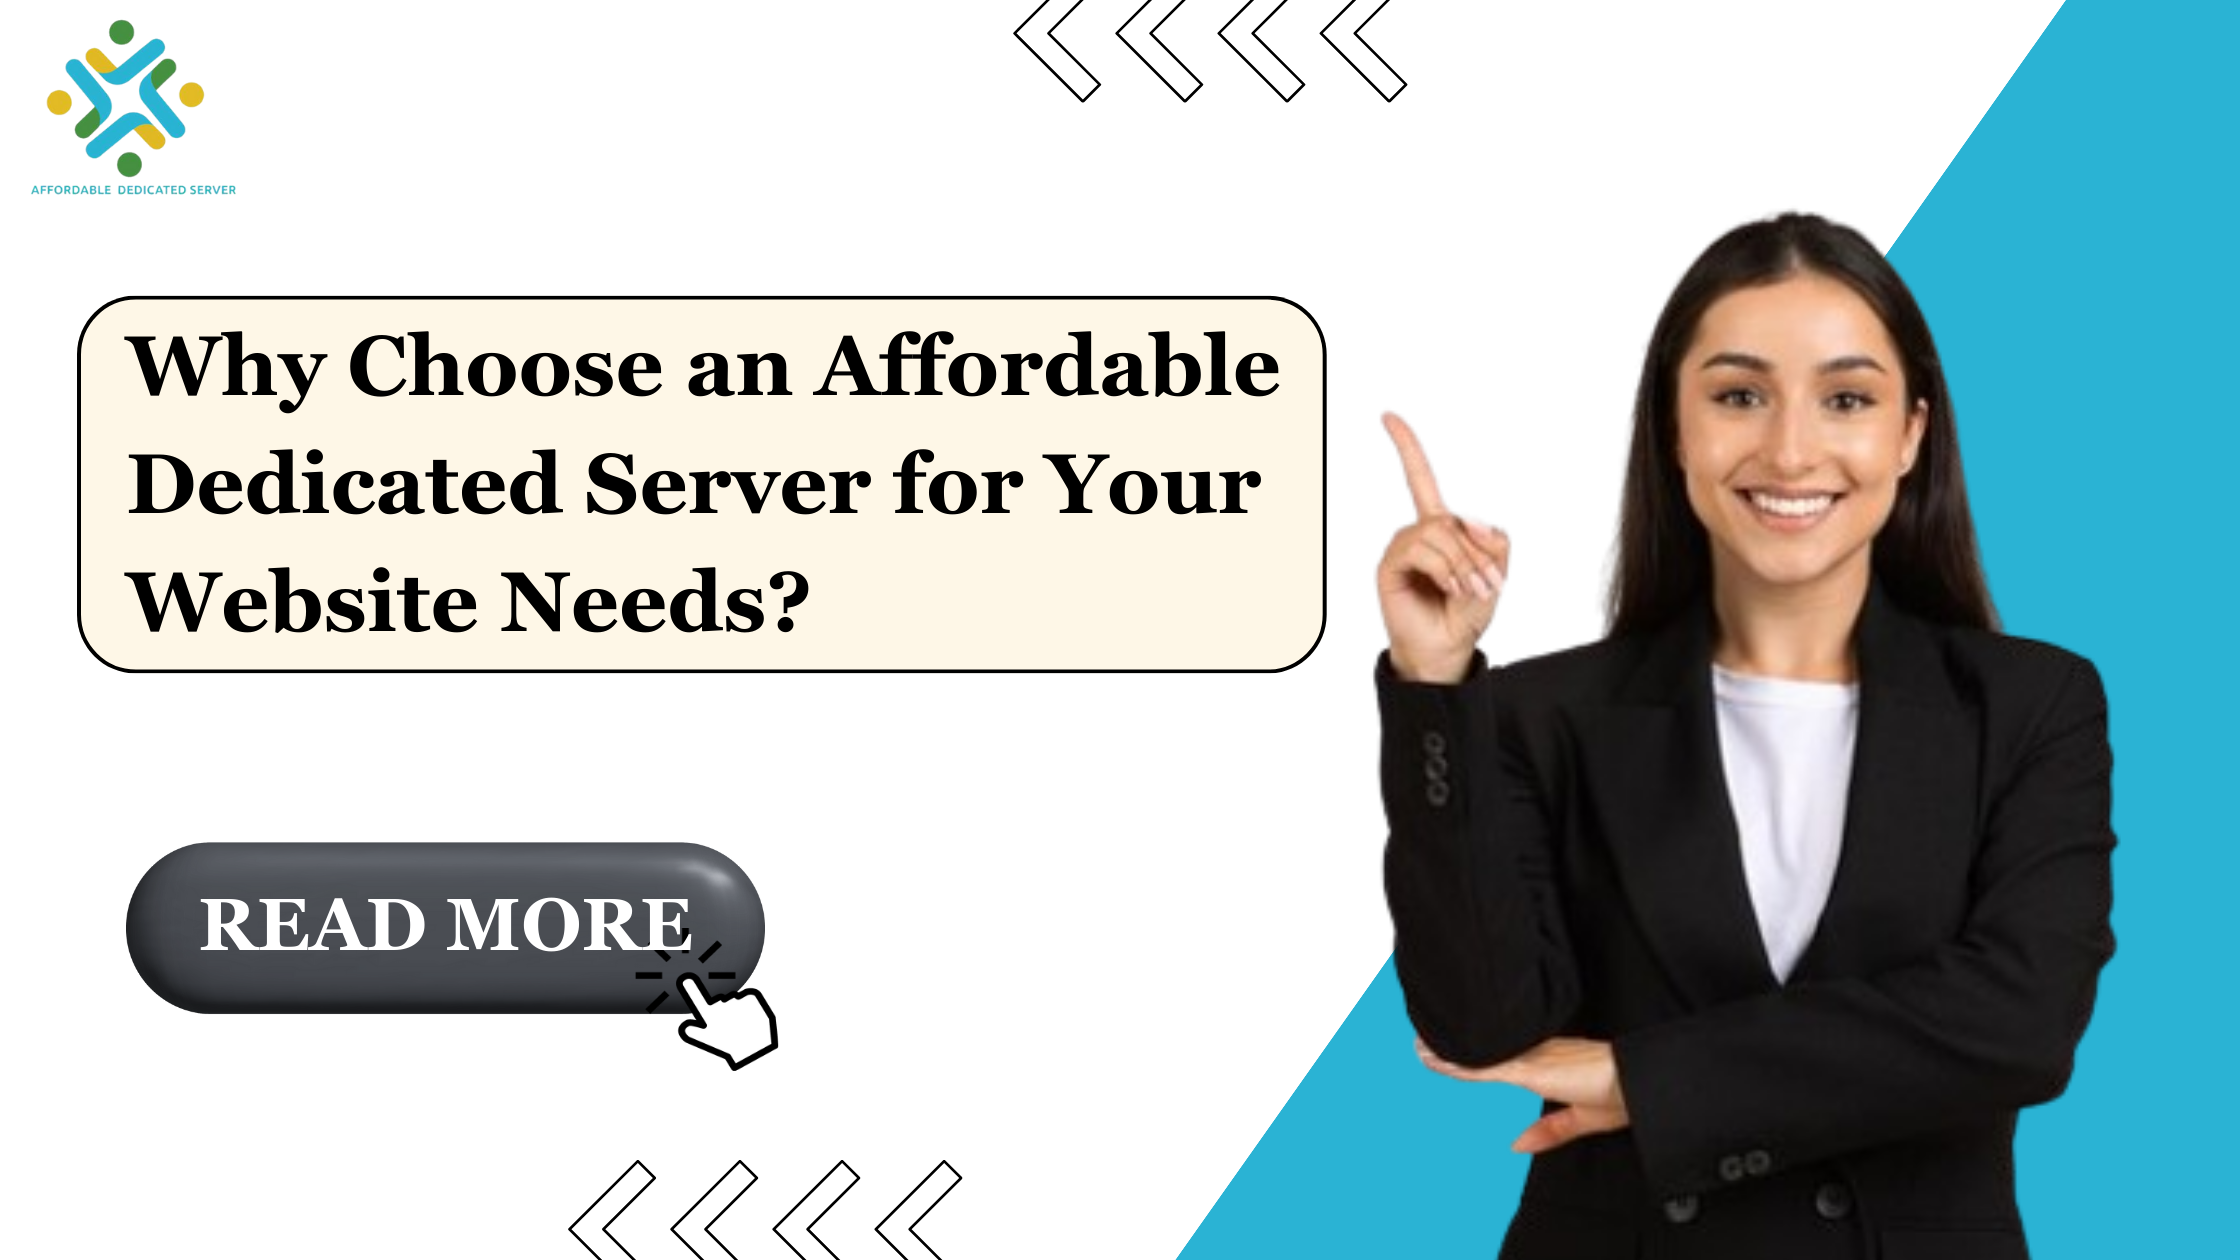 Why Choose an Affordable Dedicated Server for Your Website Needs